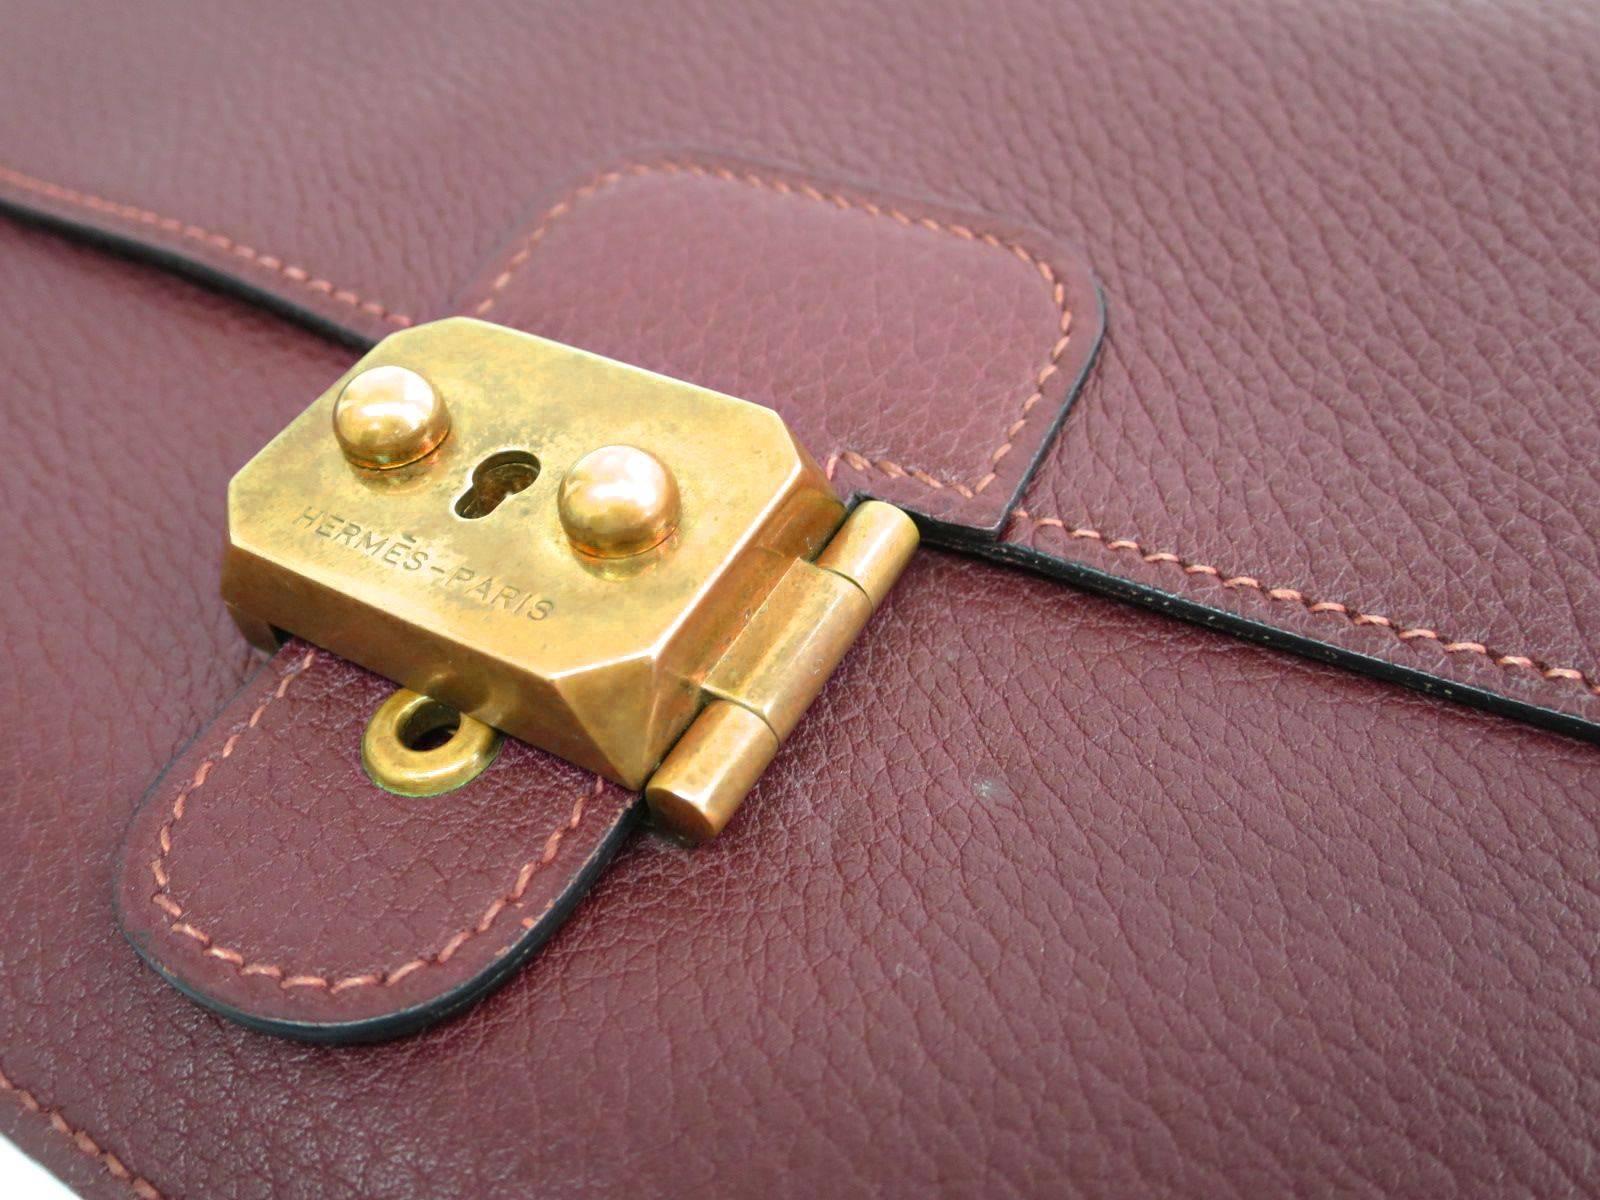 CURATOR'S NOTES

Hermes Vintage Red Leather Gold Envelope Evening Wristlet Clutch Flap Bag  

Leather
Gold tone hardware
Push lock closure
Made in France 
Date code Square A
Measures 9.5" W x 6.75" H
Includes original Hermes clochette and